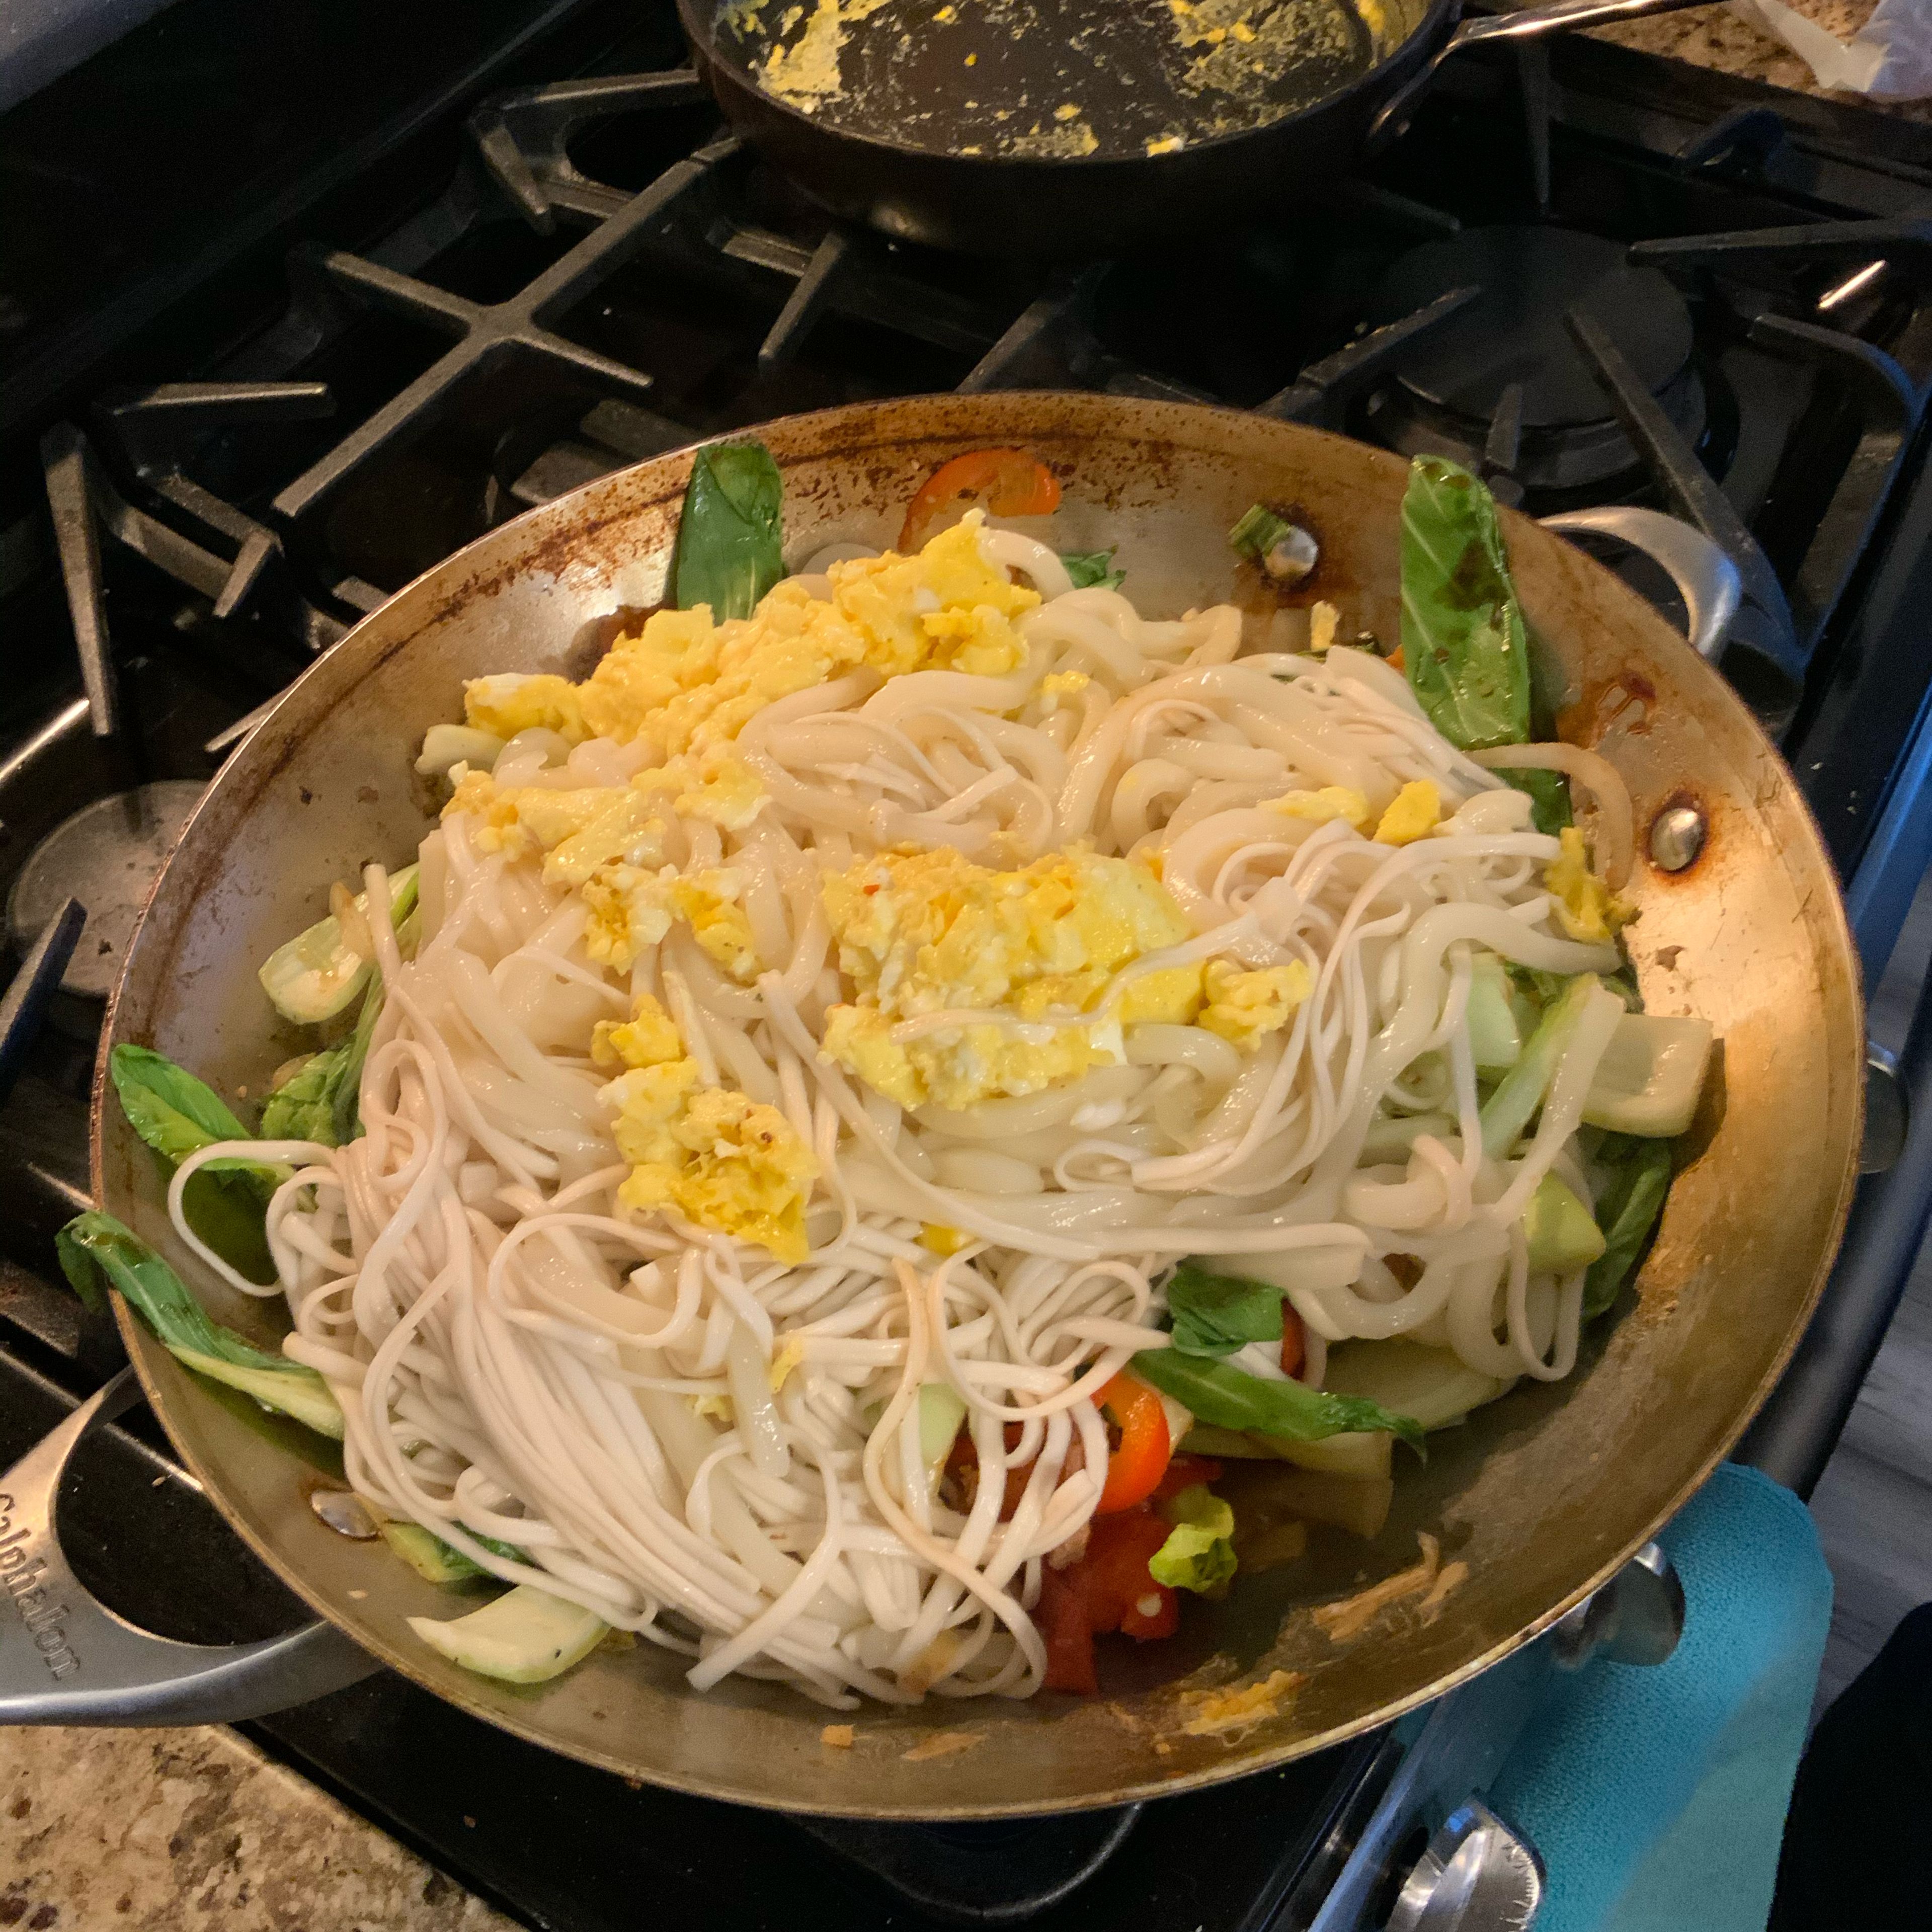 Drain the noodles and add noodles and eggs to the wok. Salt to preference.